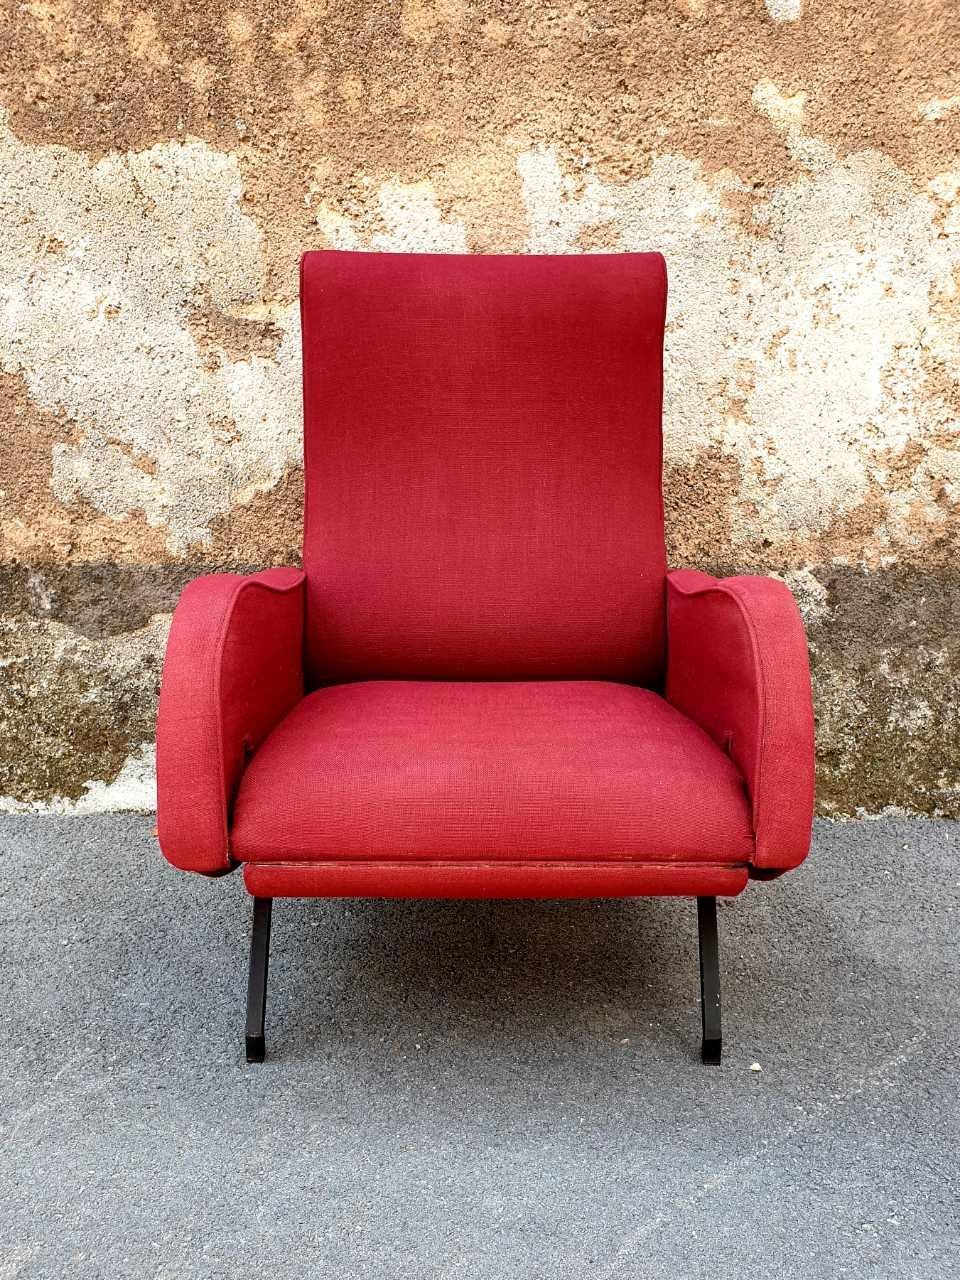 Nice reclining armchair designed in style of Marco Zanuso in the 60s.

The extended armchair measures 160 cm.